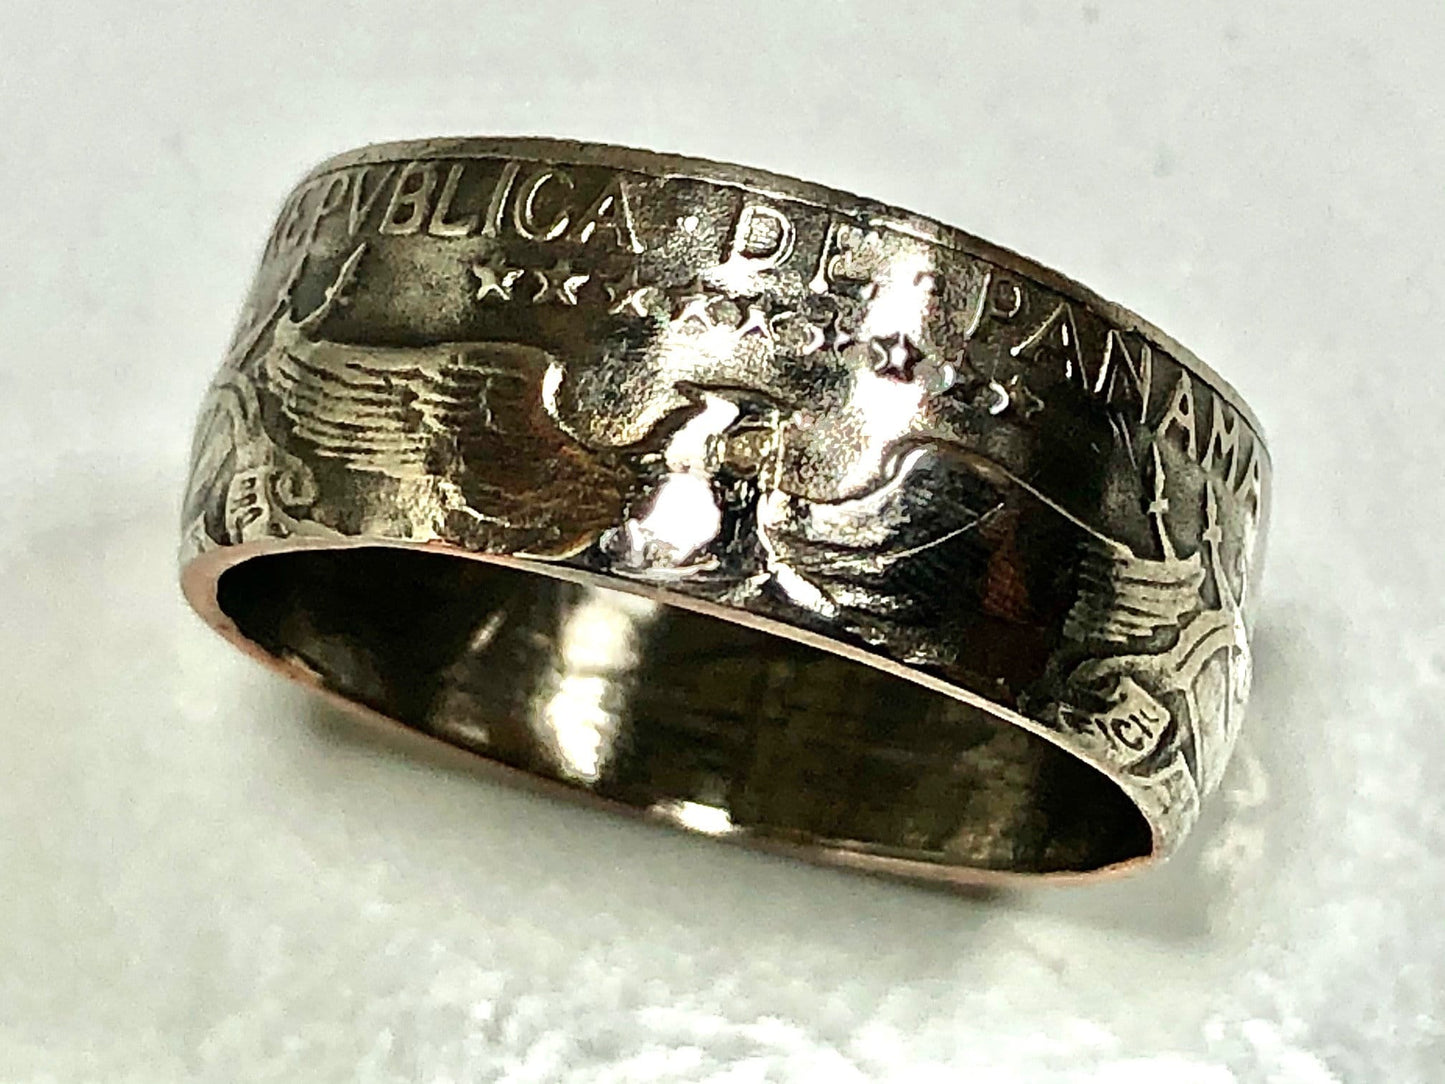 Panama 1/4 Balboa Coin Ring Handmade Personal Jewelry Ring Charm Gift For Friend Coin Ring Gift For Him Her World Coin Collector